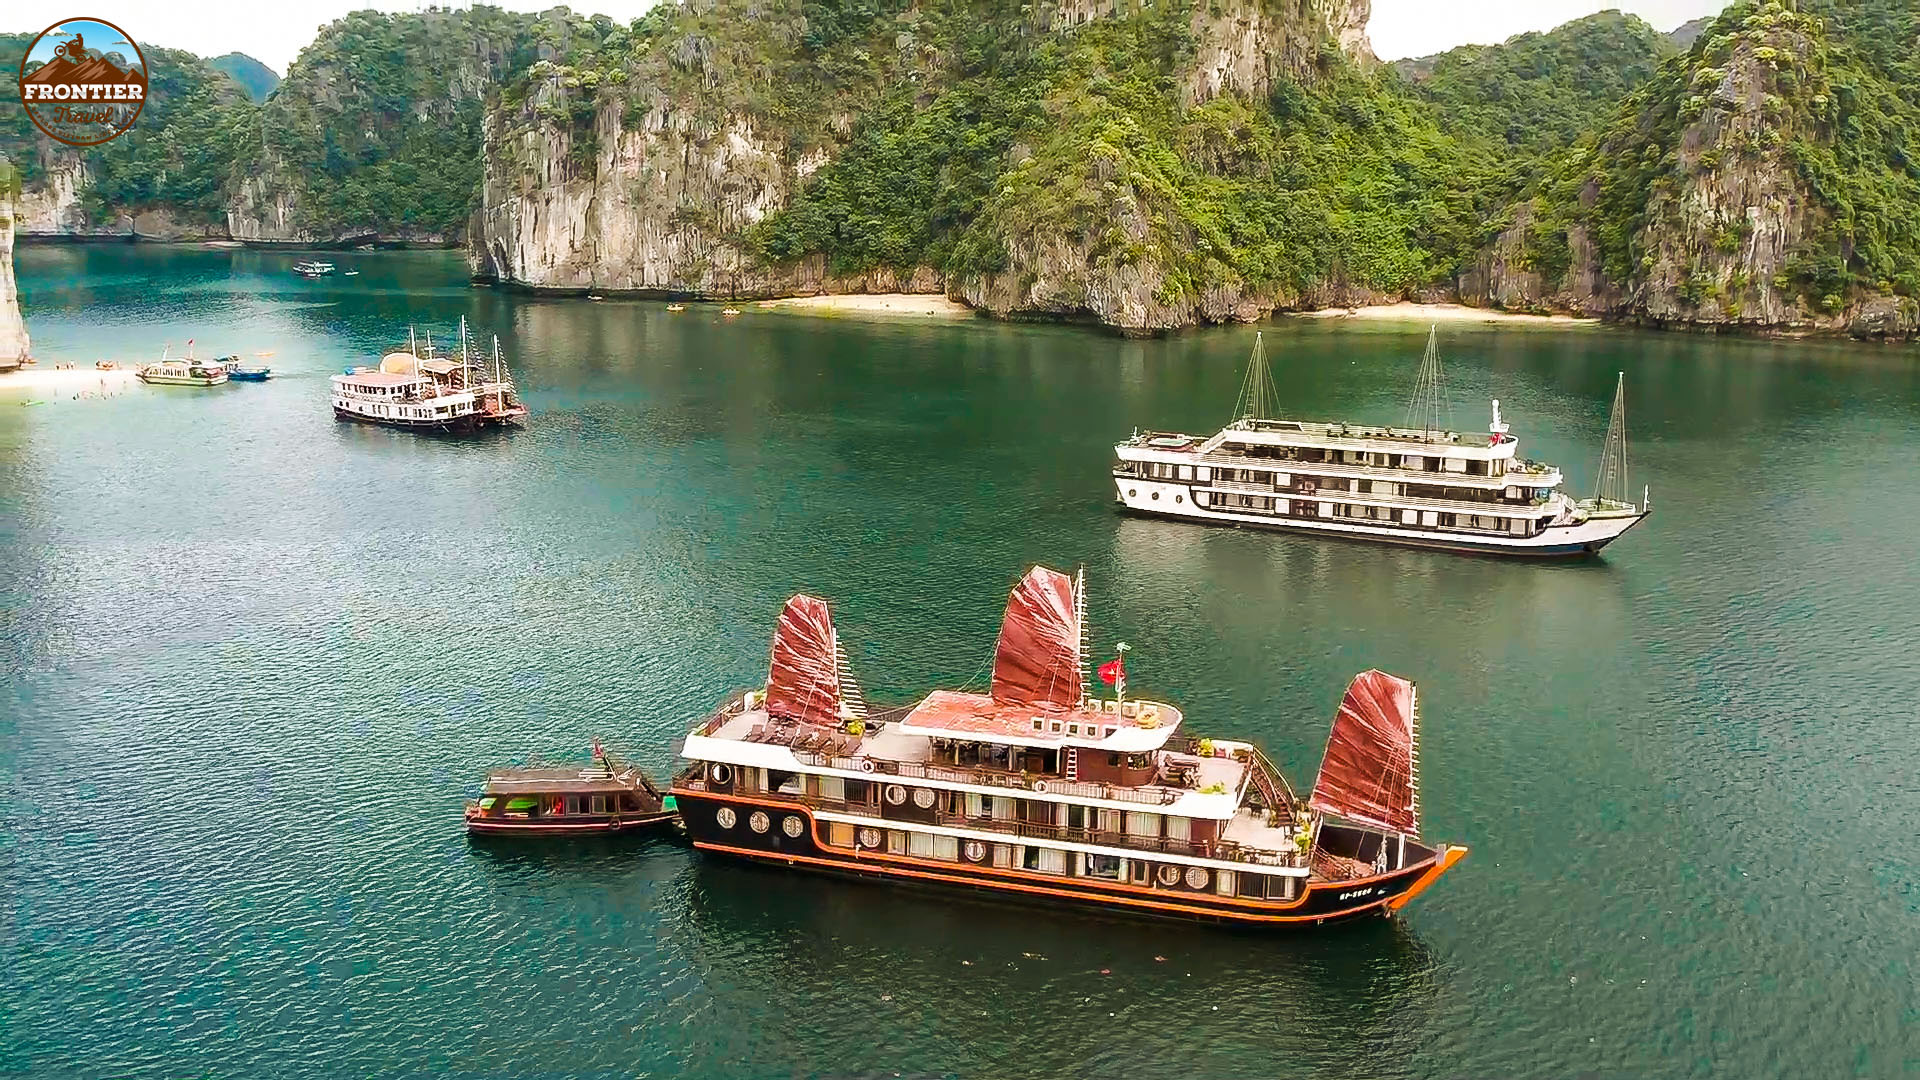 Day 11: (10th July) Ha Long Bay Relaxation (B/L/D)